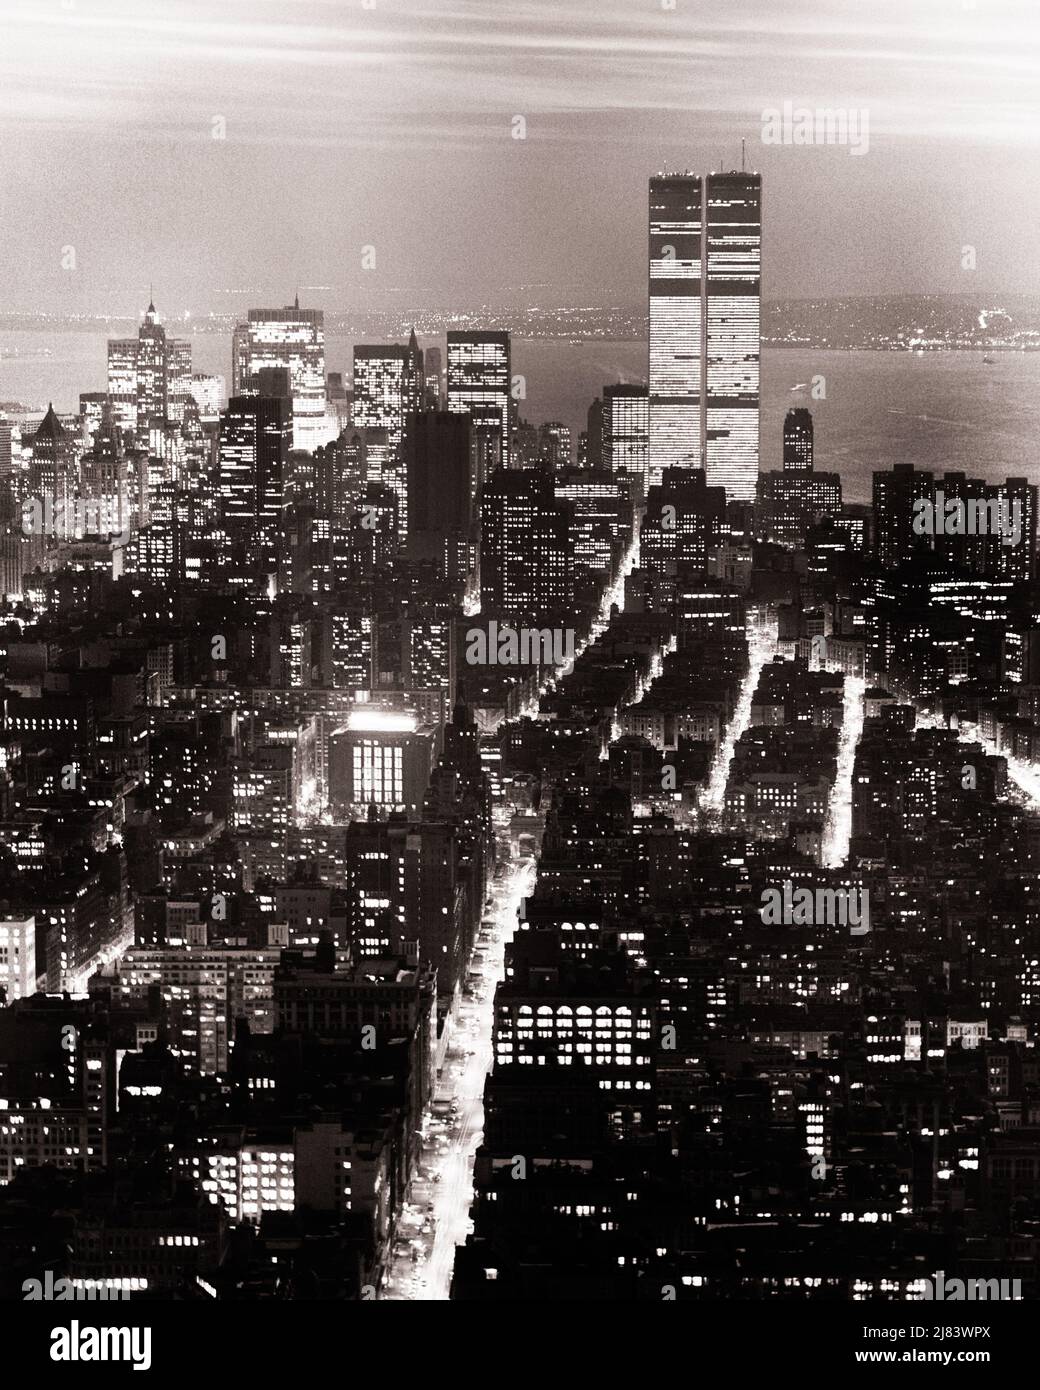 1970s NIGHT SCENE OF SKYLINE OF WESTERN DOWNTOWN MANHATTAN WITH WORLD TRADE CENTER TWIN TOWERS TAKEN FROM MIDTOWN NYC USA - r24504 HAR001 HARS 911 NEW YORK STRUCTURES CITIES TERRORISM BEFORE 911 EDIFICE NEW YORK CITY TRADE WORLD TRADE TOWERS WORLD TRADE CENTER BLACK AND WHITE DESTROYED HAR001 LOWER MANHATTAN OLD FASHIONED SEPTEMBER 11 2001 TOWERS TWIN TOWERS Stock Photo